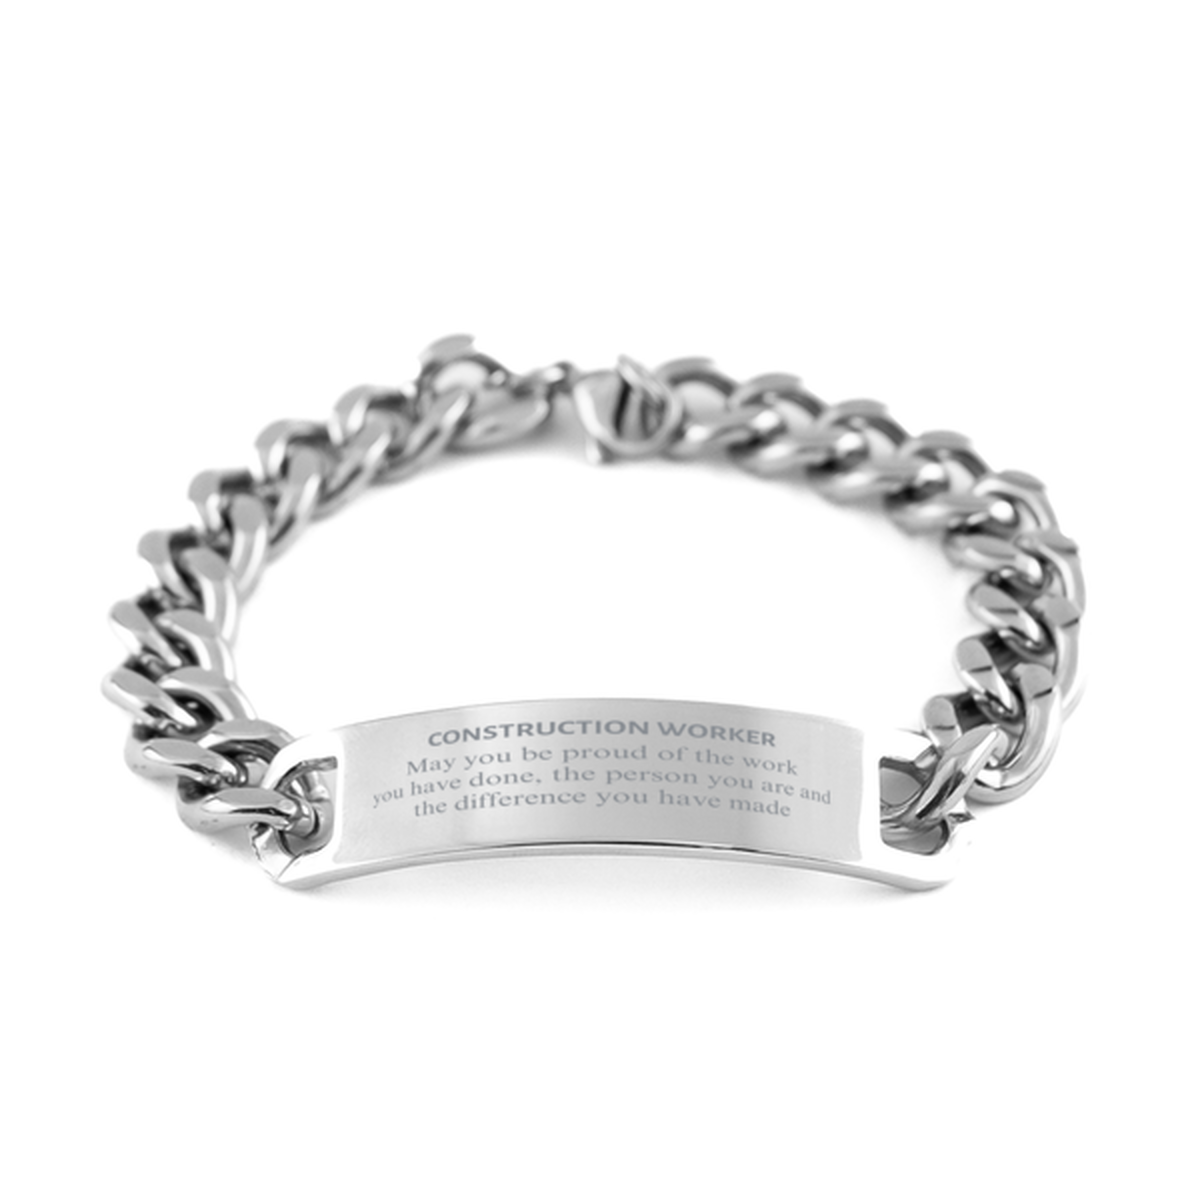 Construction Worker May you be proud of the work you have done, Retirement Construction Worker Cuban Chain Stainless Steel Bracelet for Colleague Appreciation Gifts Amazing for Construction Worker